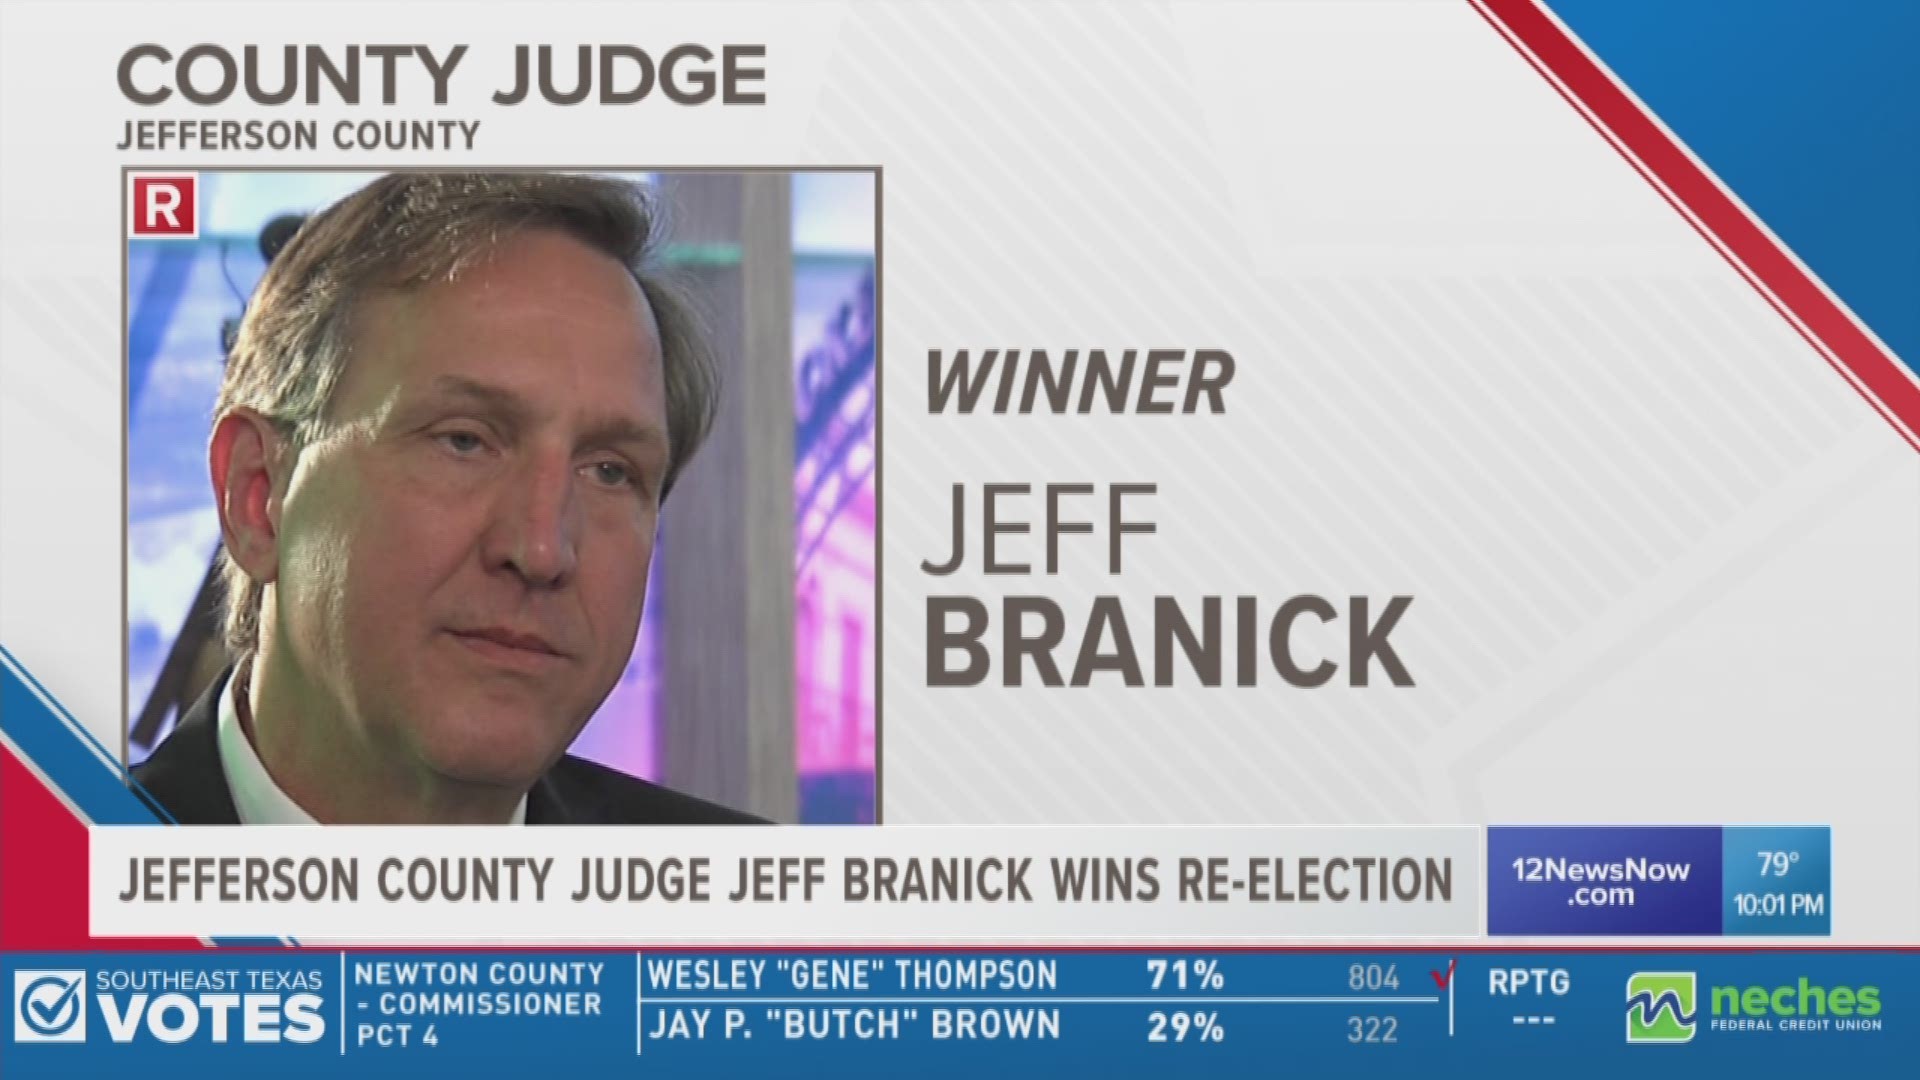 Incumbent Jefferson County Judge Jeff Branick will retain his seat after beating Nick Lampson